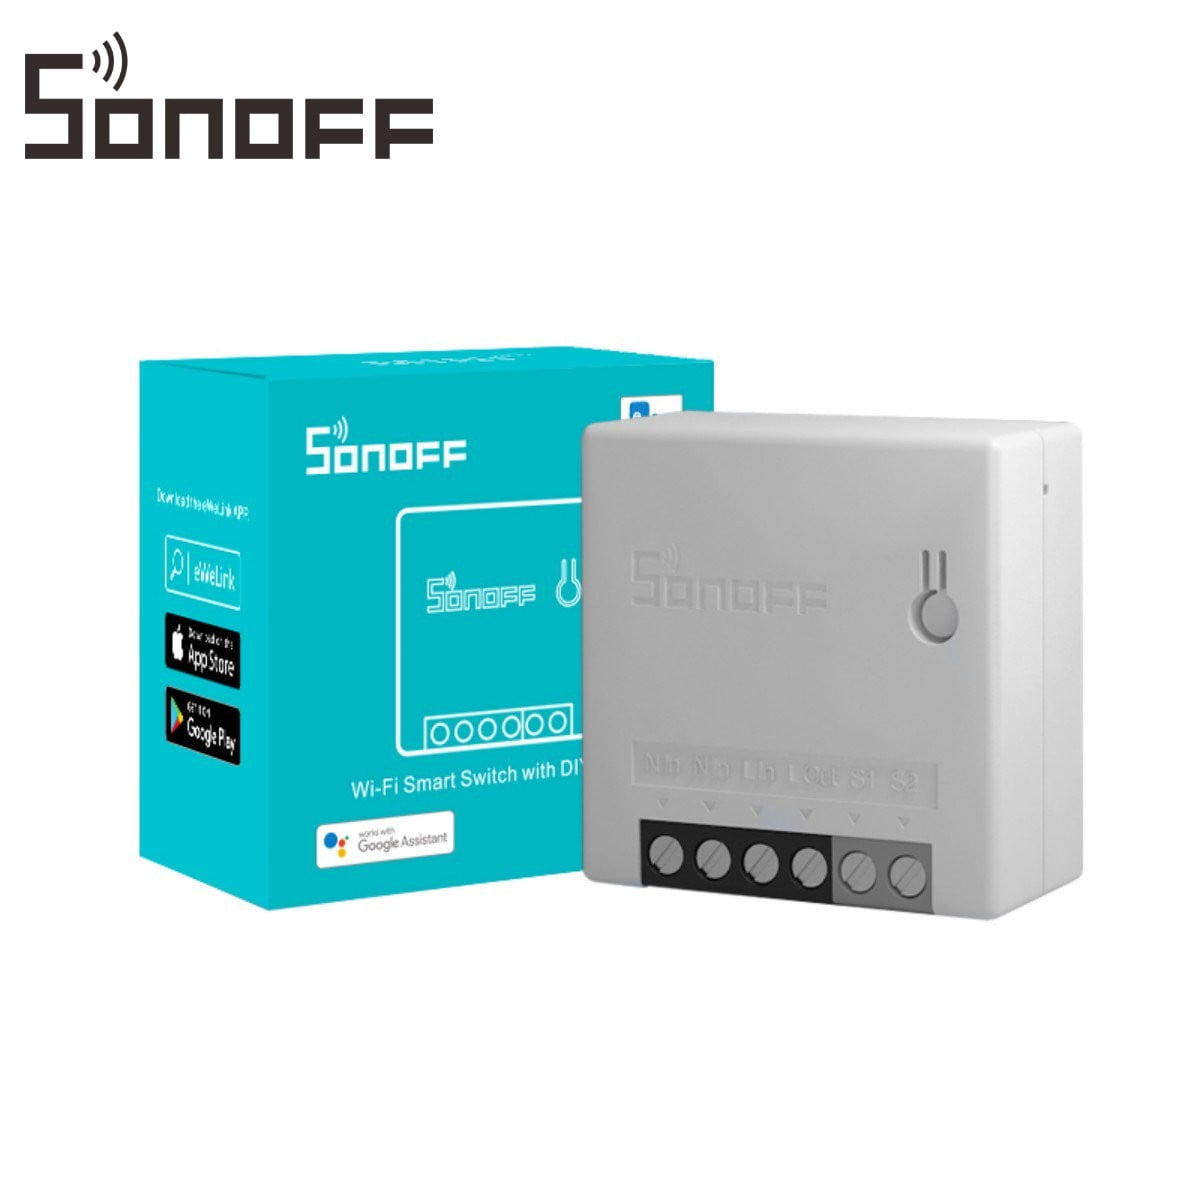 SONOFF Mini R2 10A Smart WiFi Wireless Light Switch Works with Alexa &  Google Home Assistant, Universal DIY Module for Smart Home 